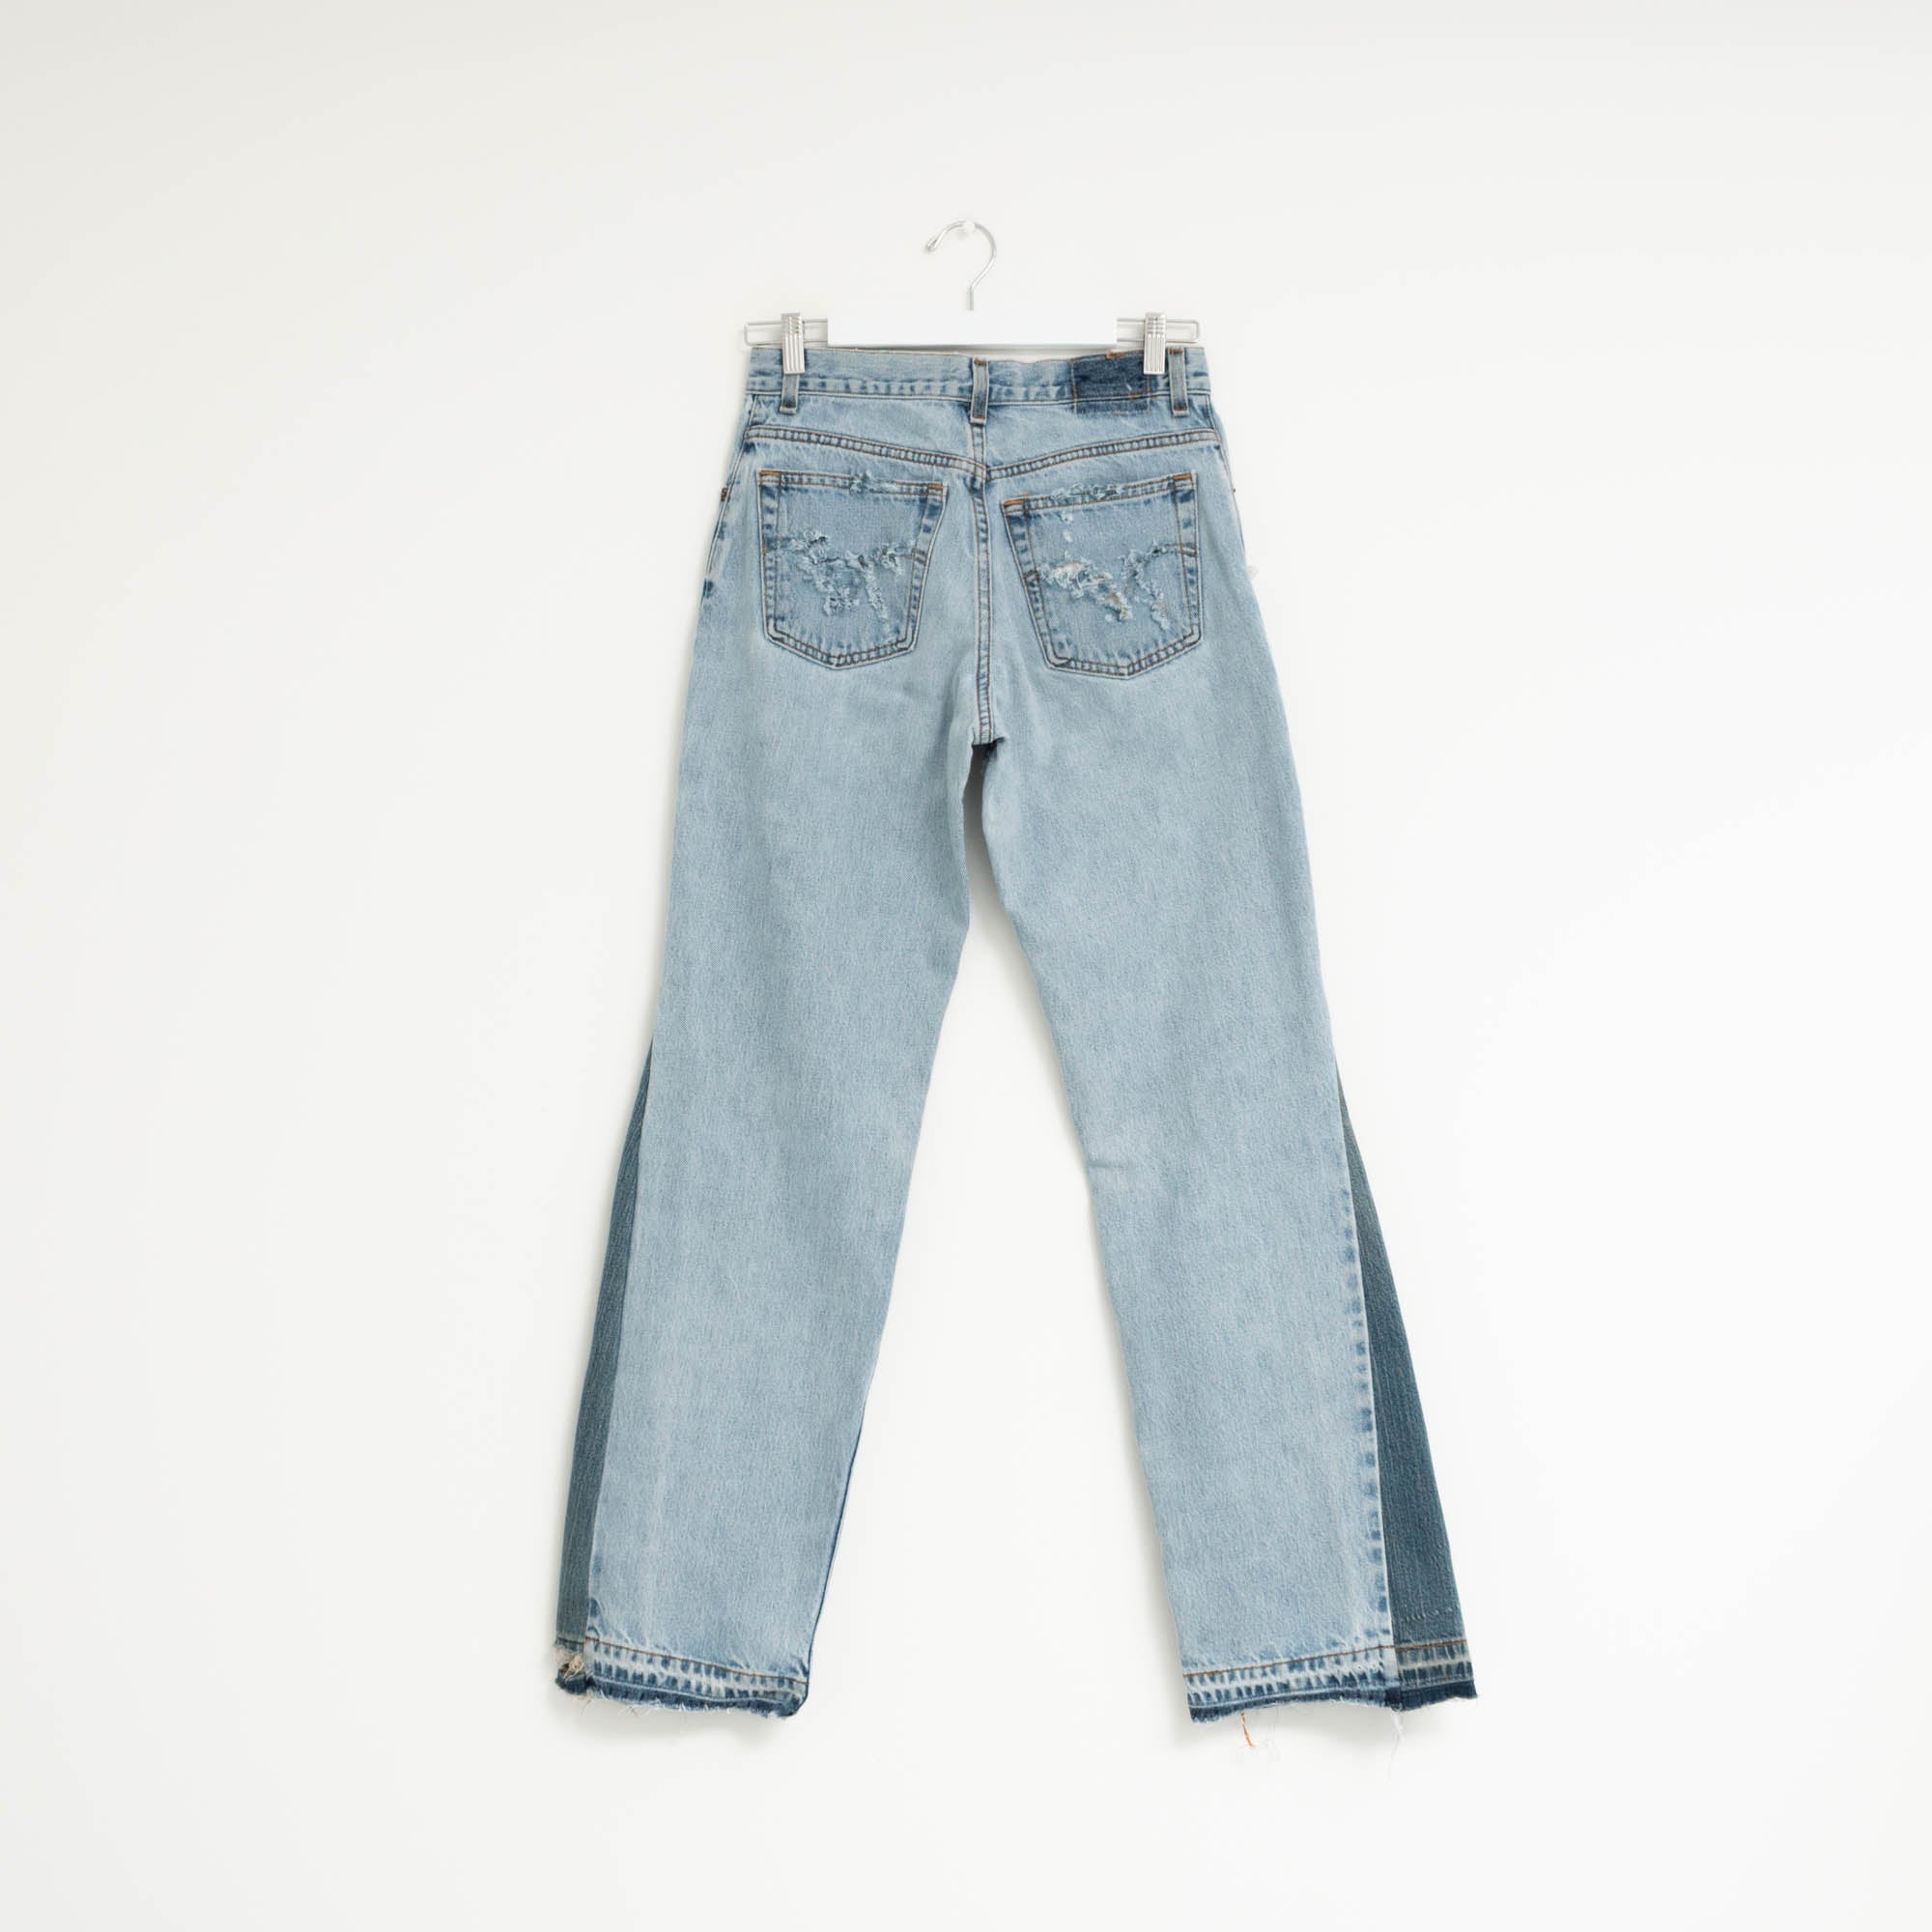 "FLARE" Jeans W30 L33